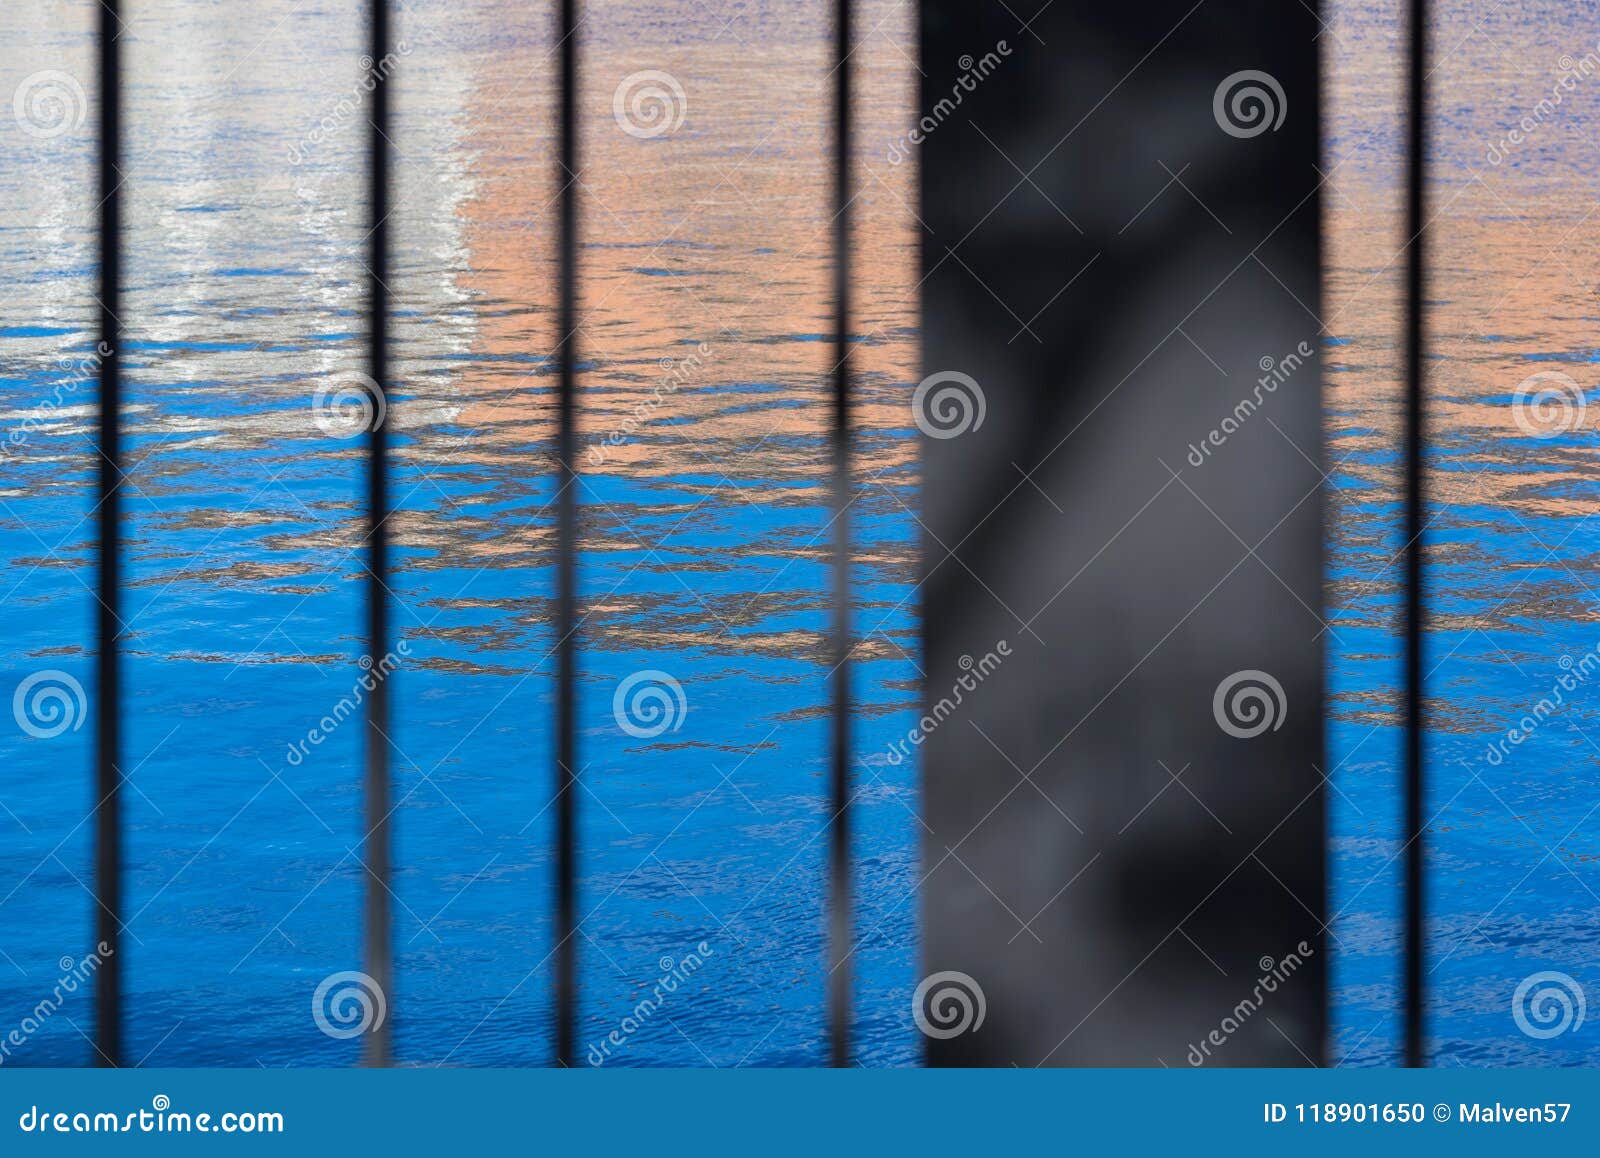 abstract indistinct or vague background